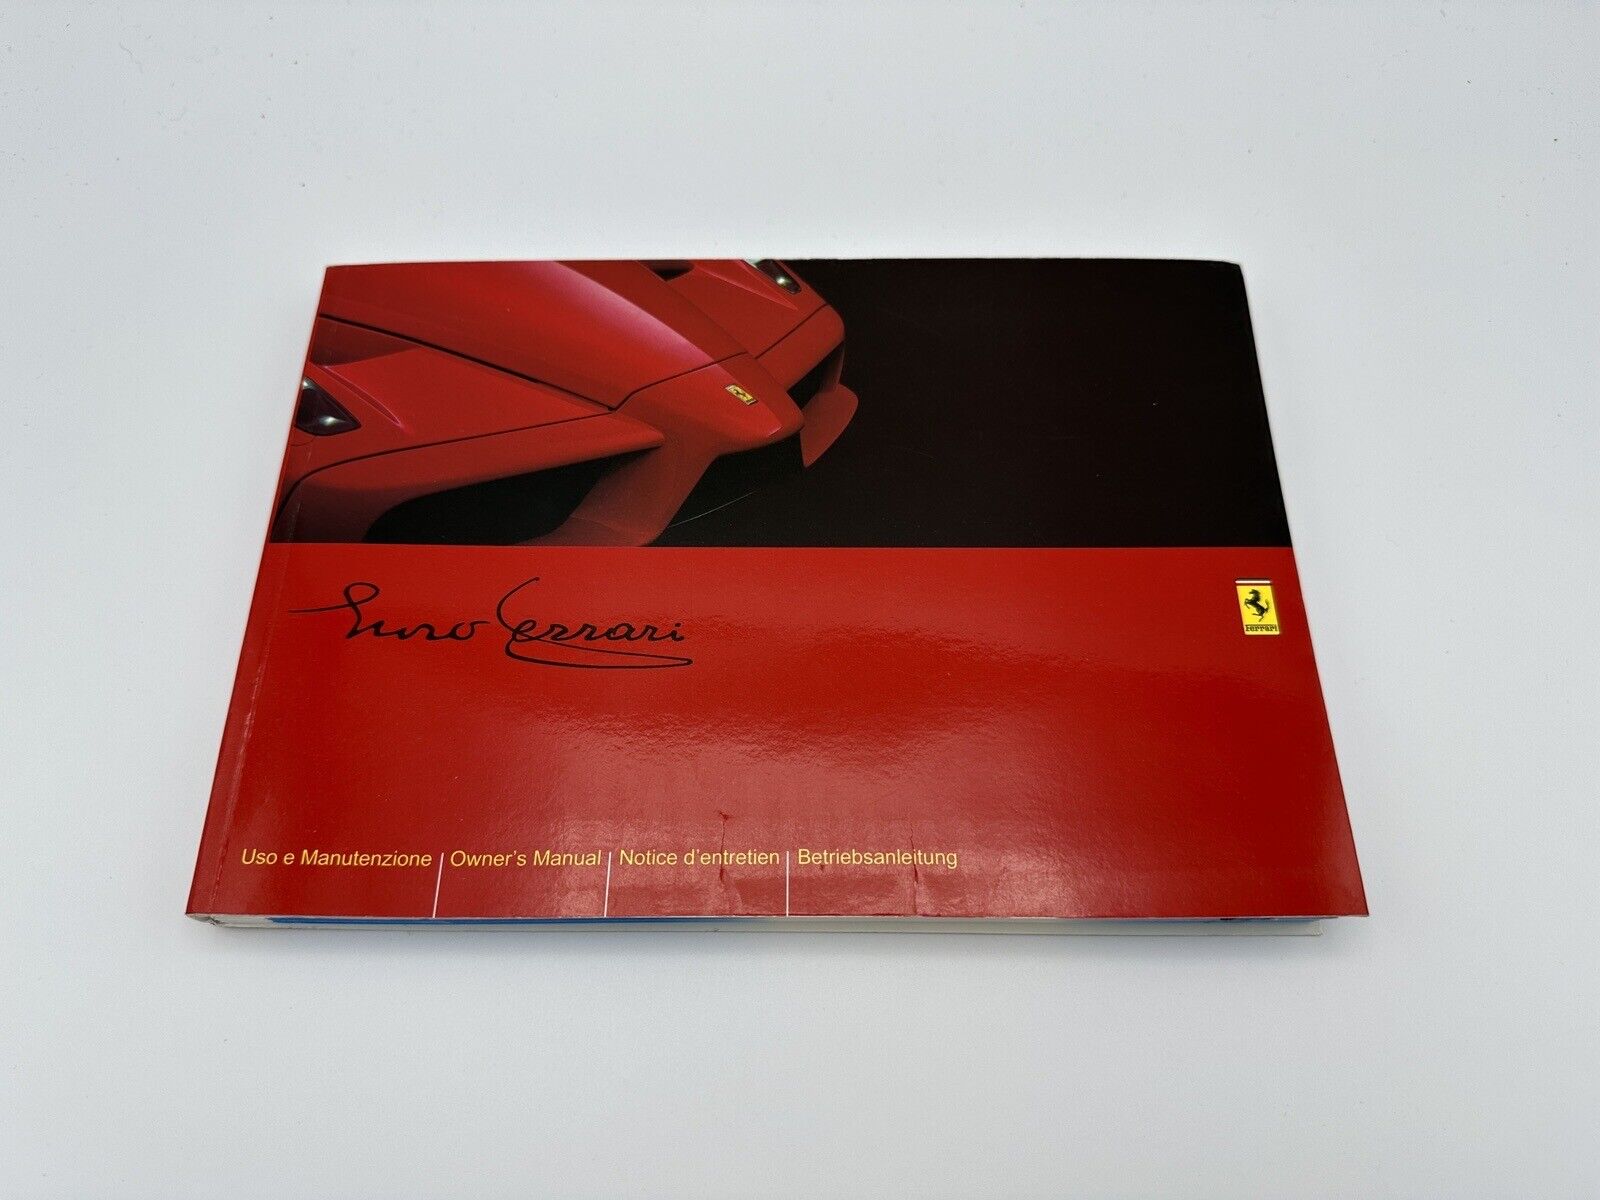 FERRARI ENZO OWNERS MANUAL | INSTRUCTIONS MANUAL | POUCH BOOK #1855/02 1ST PRINT